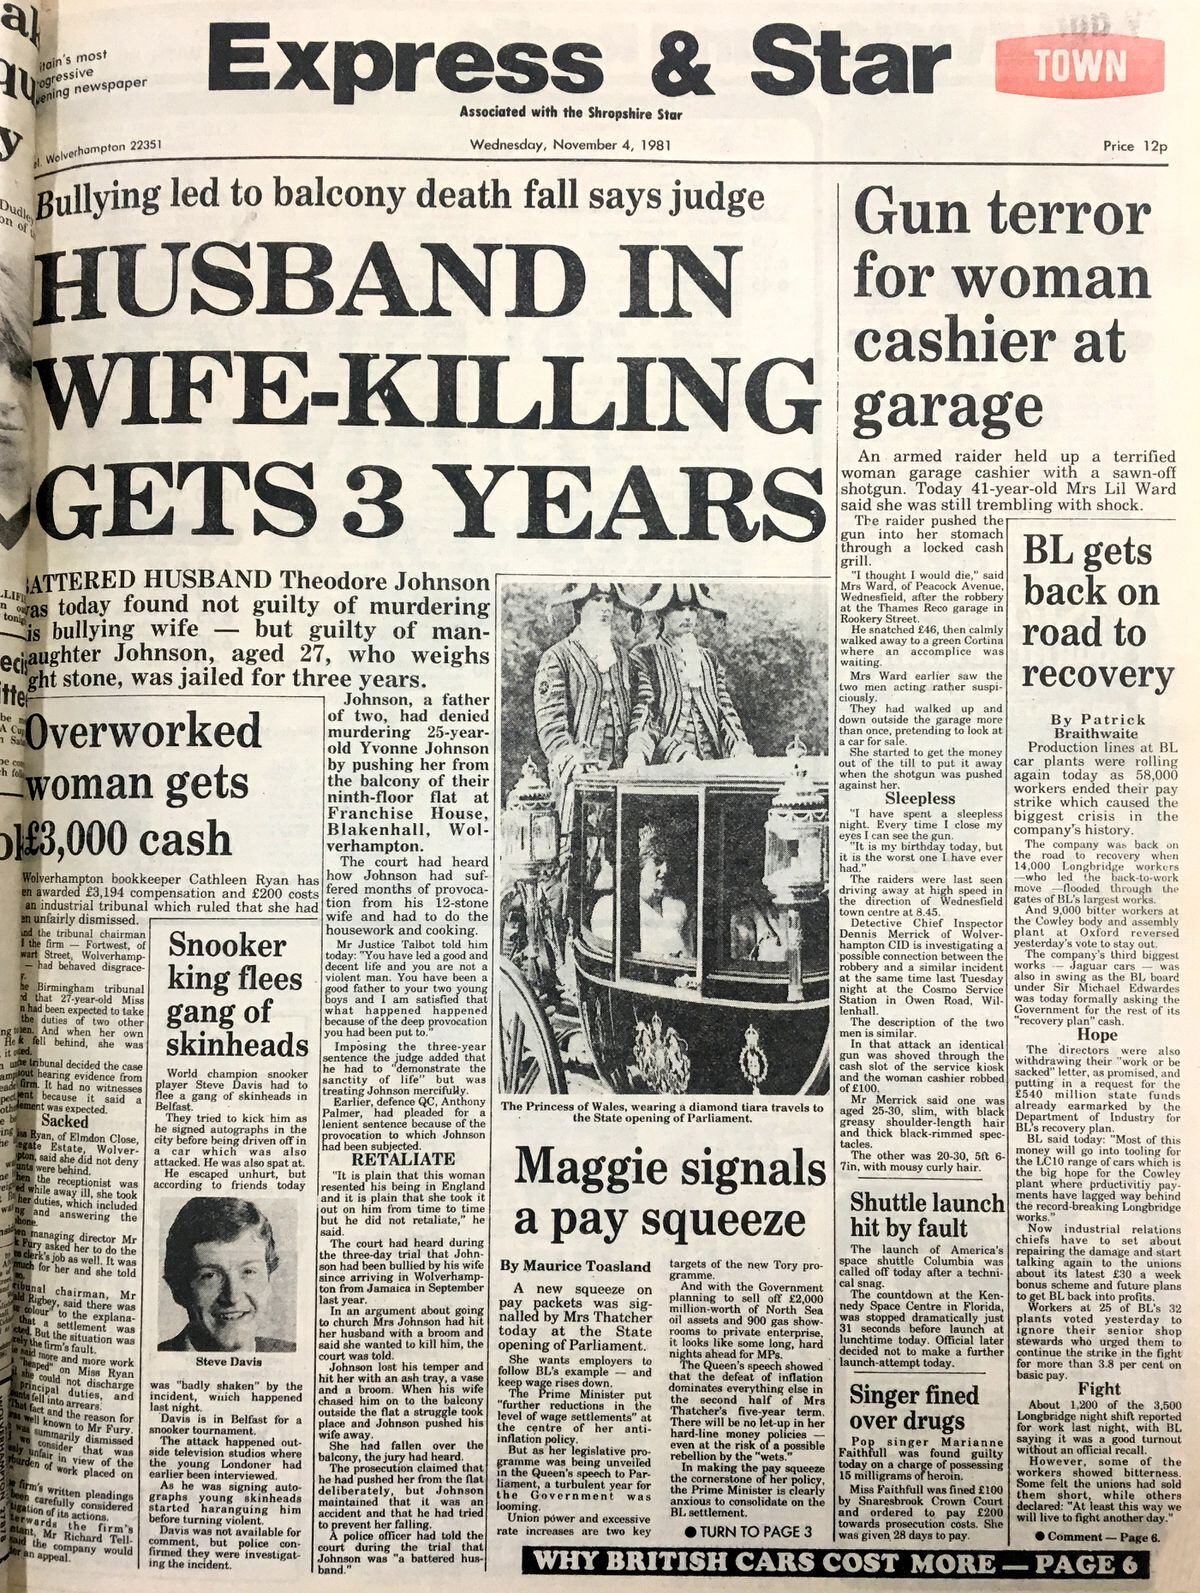 The Express & Star reported on the verdict from the trial in 1981